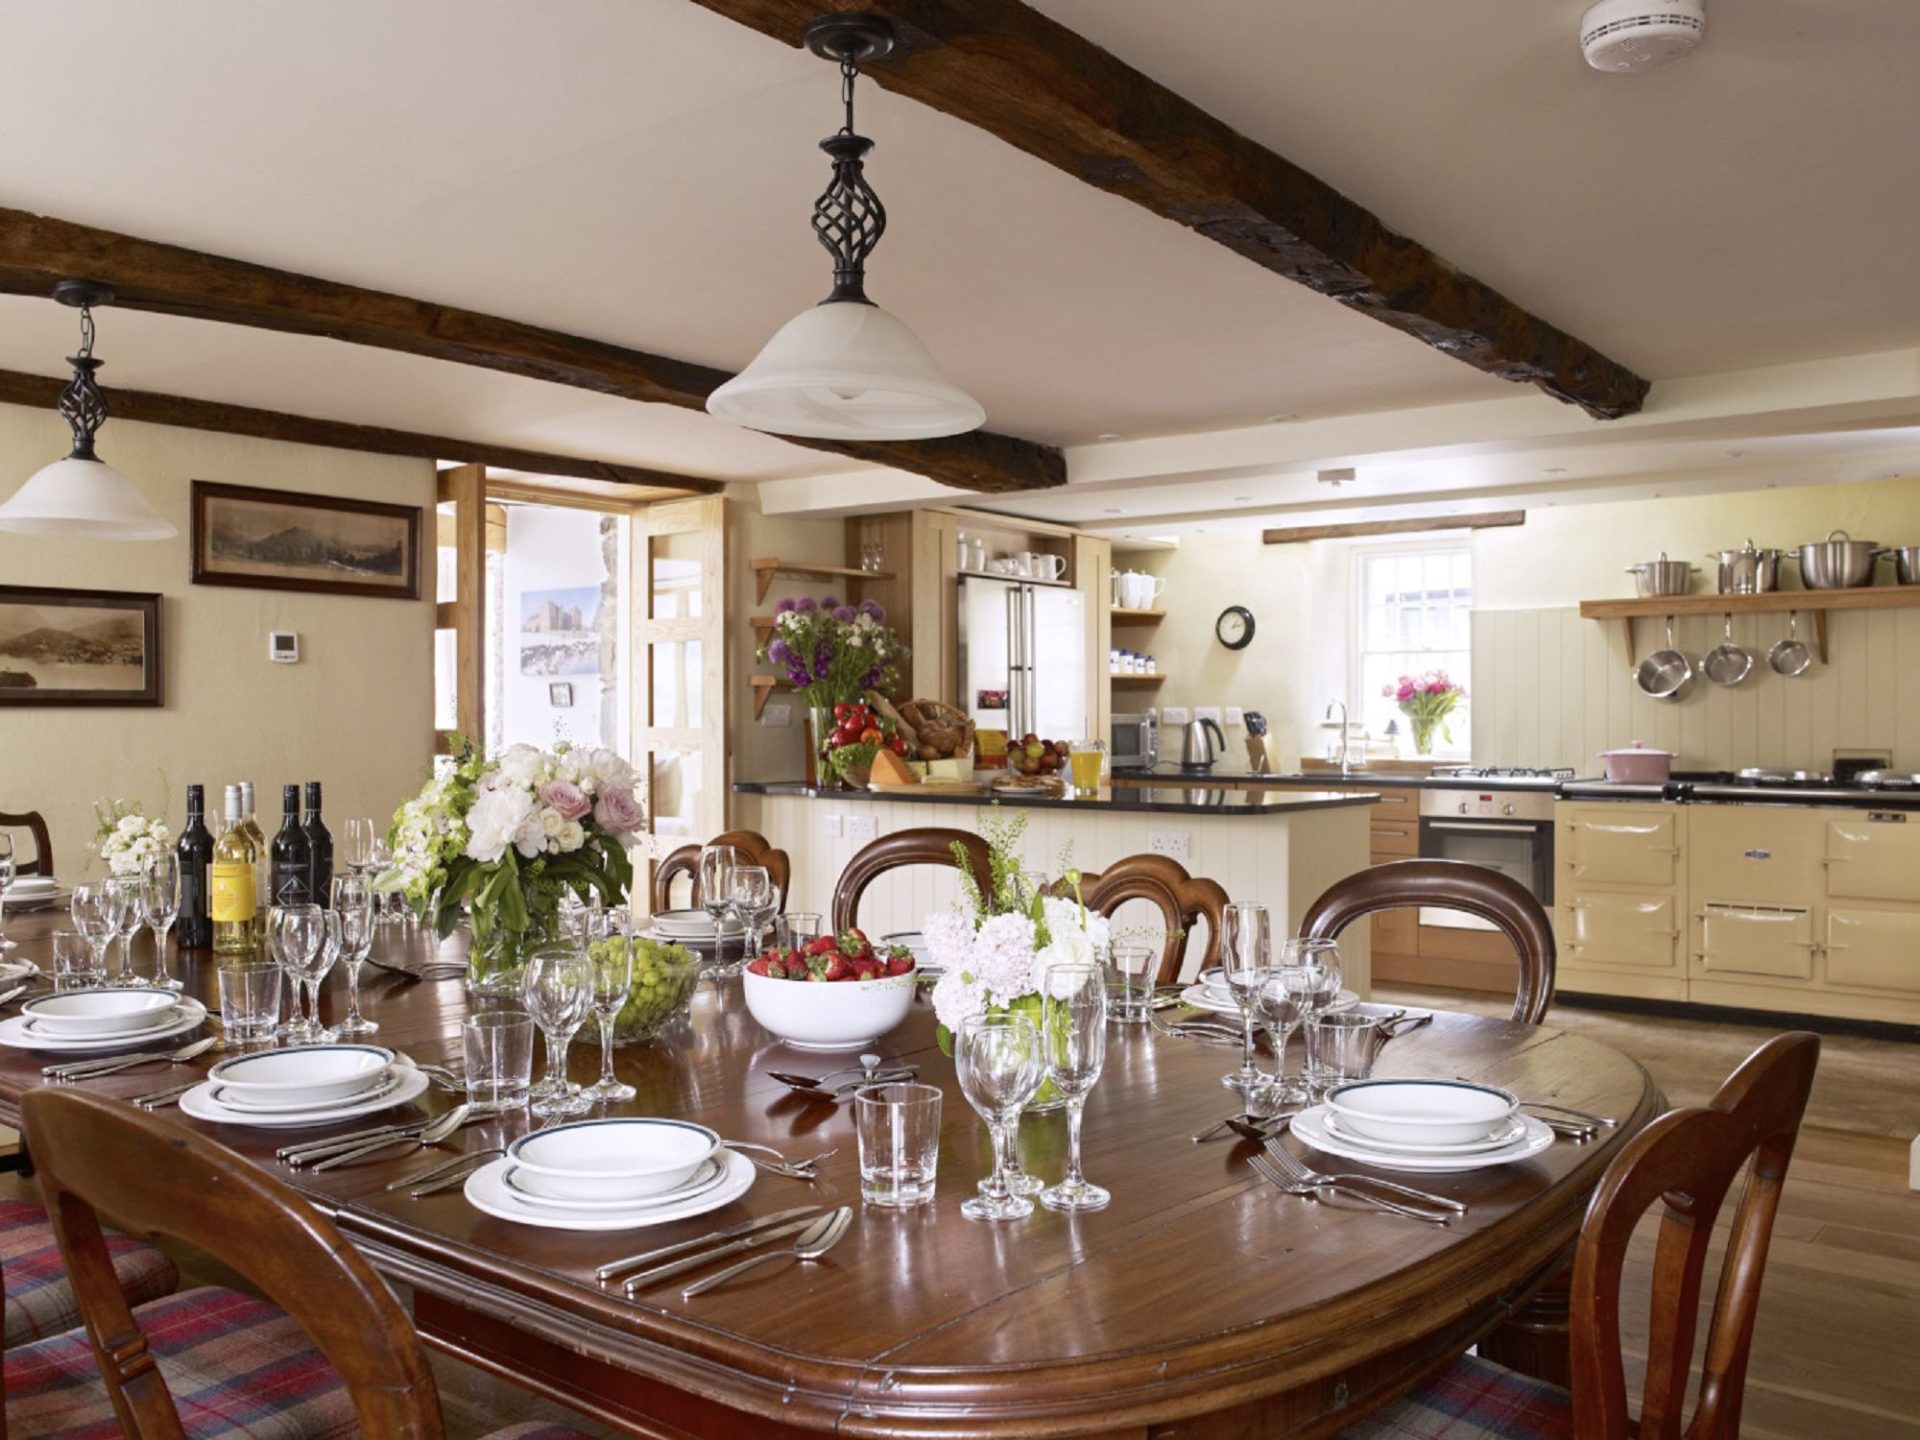 Hause Hall Farm open plan kitchen and dining room accessible accommodation in the Lake District National Park step free on ground floor at The Rowley Estates